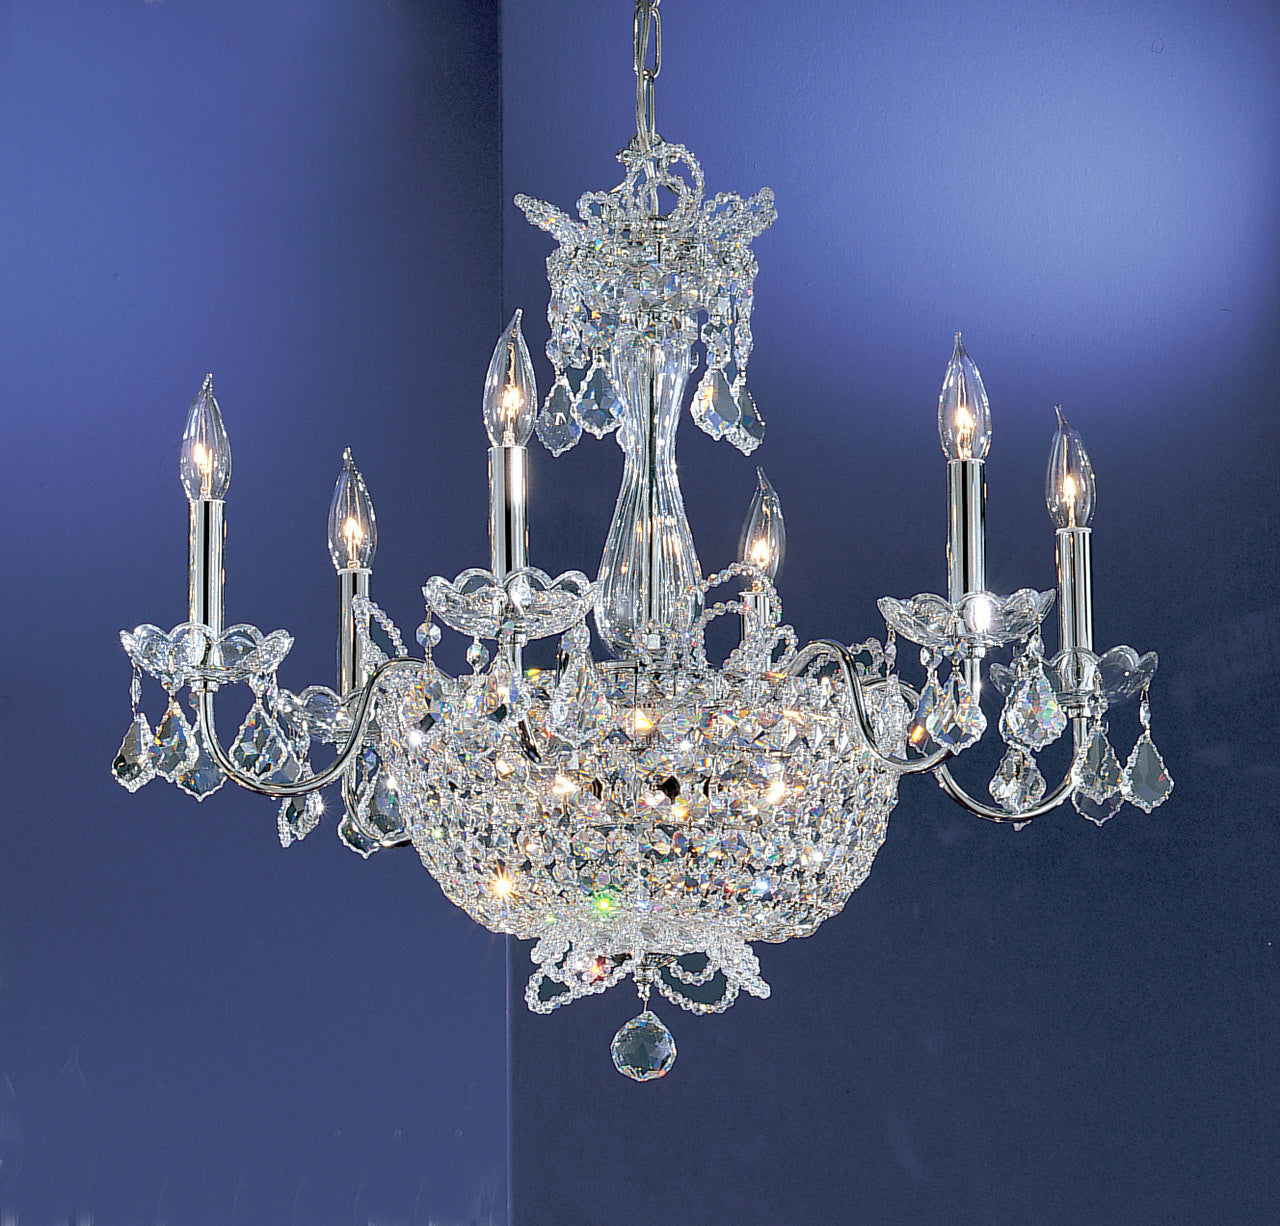 Classic Lighting 69786 CH CP Crown Jewels Crystal Chandelier in Chrome